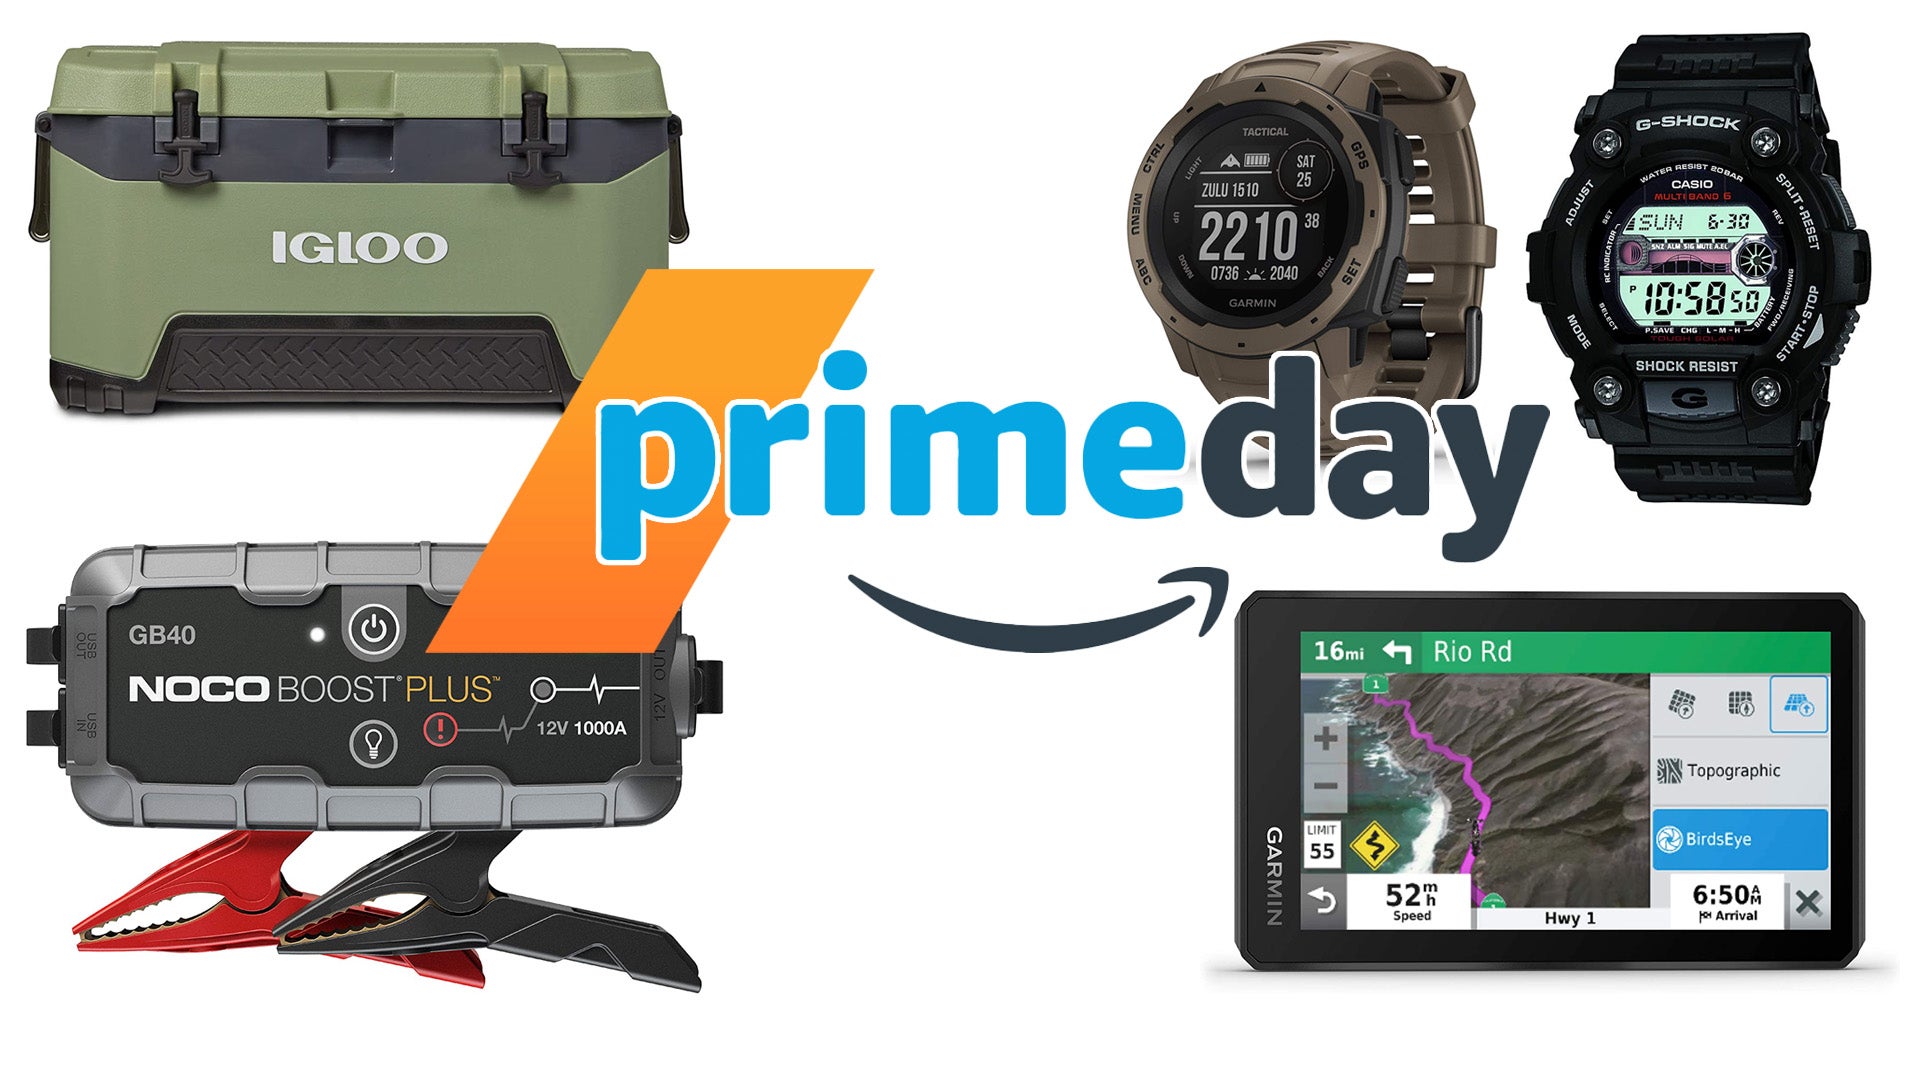 Amazon Prime Day Sales You Can’t Afford to Miss